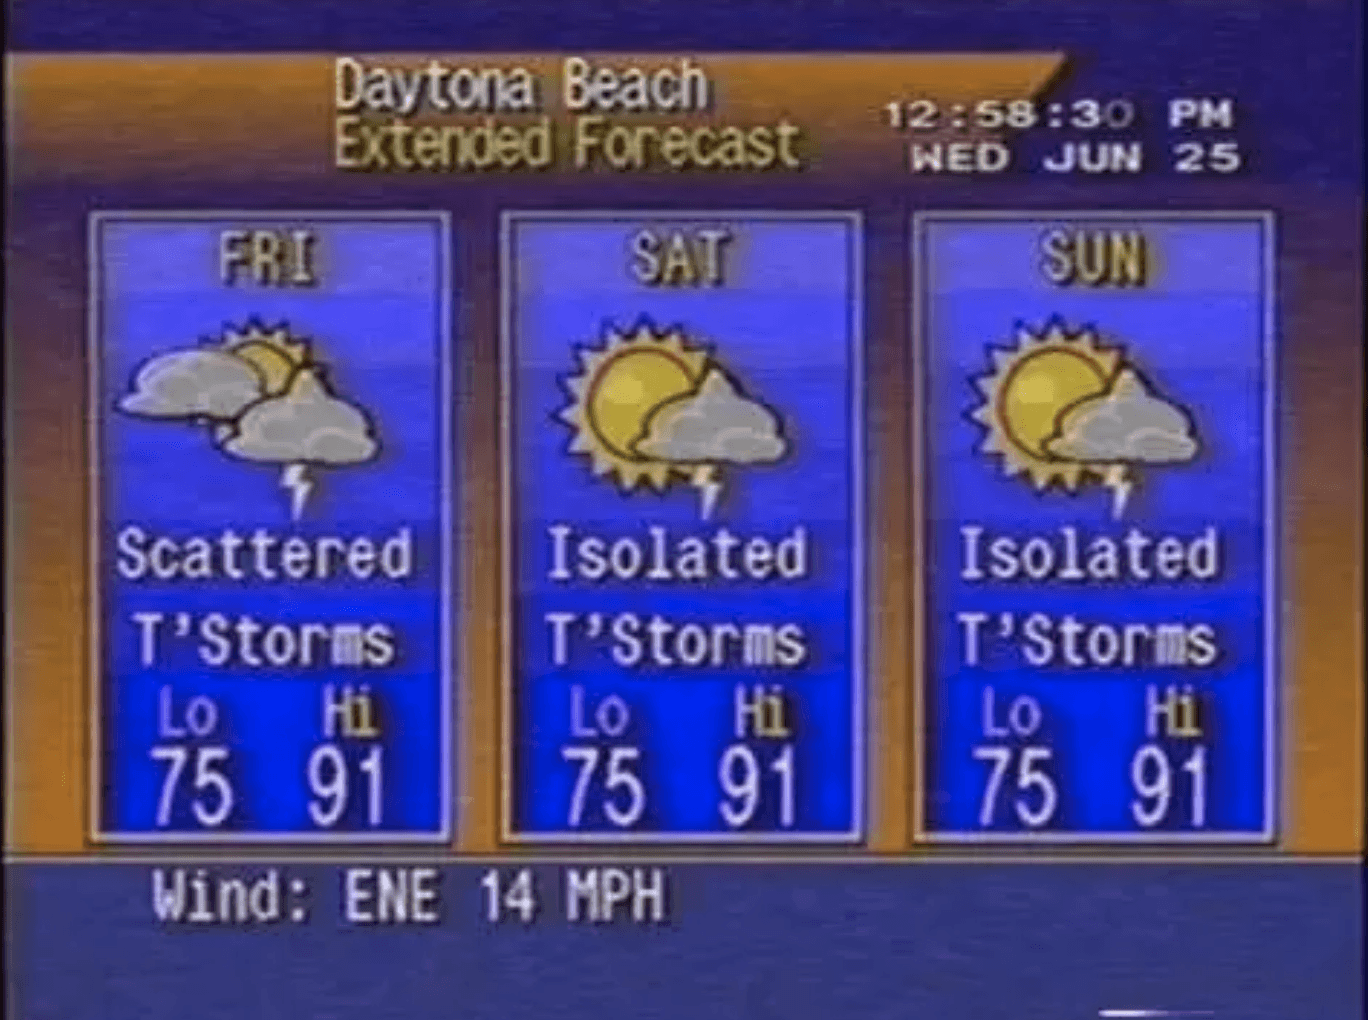 Old Weather Channel Logo - These sweet Weather Channel graphics